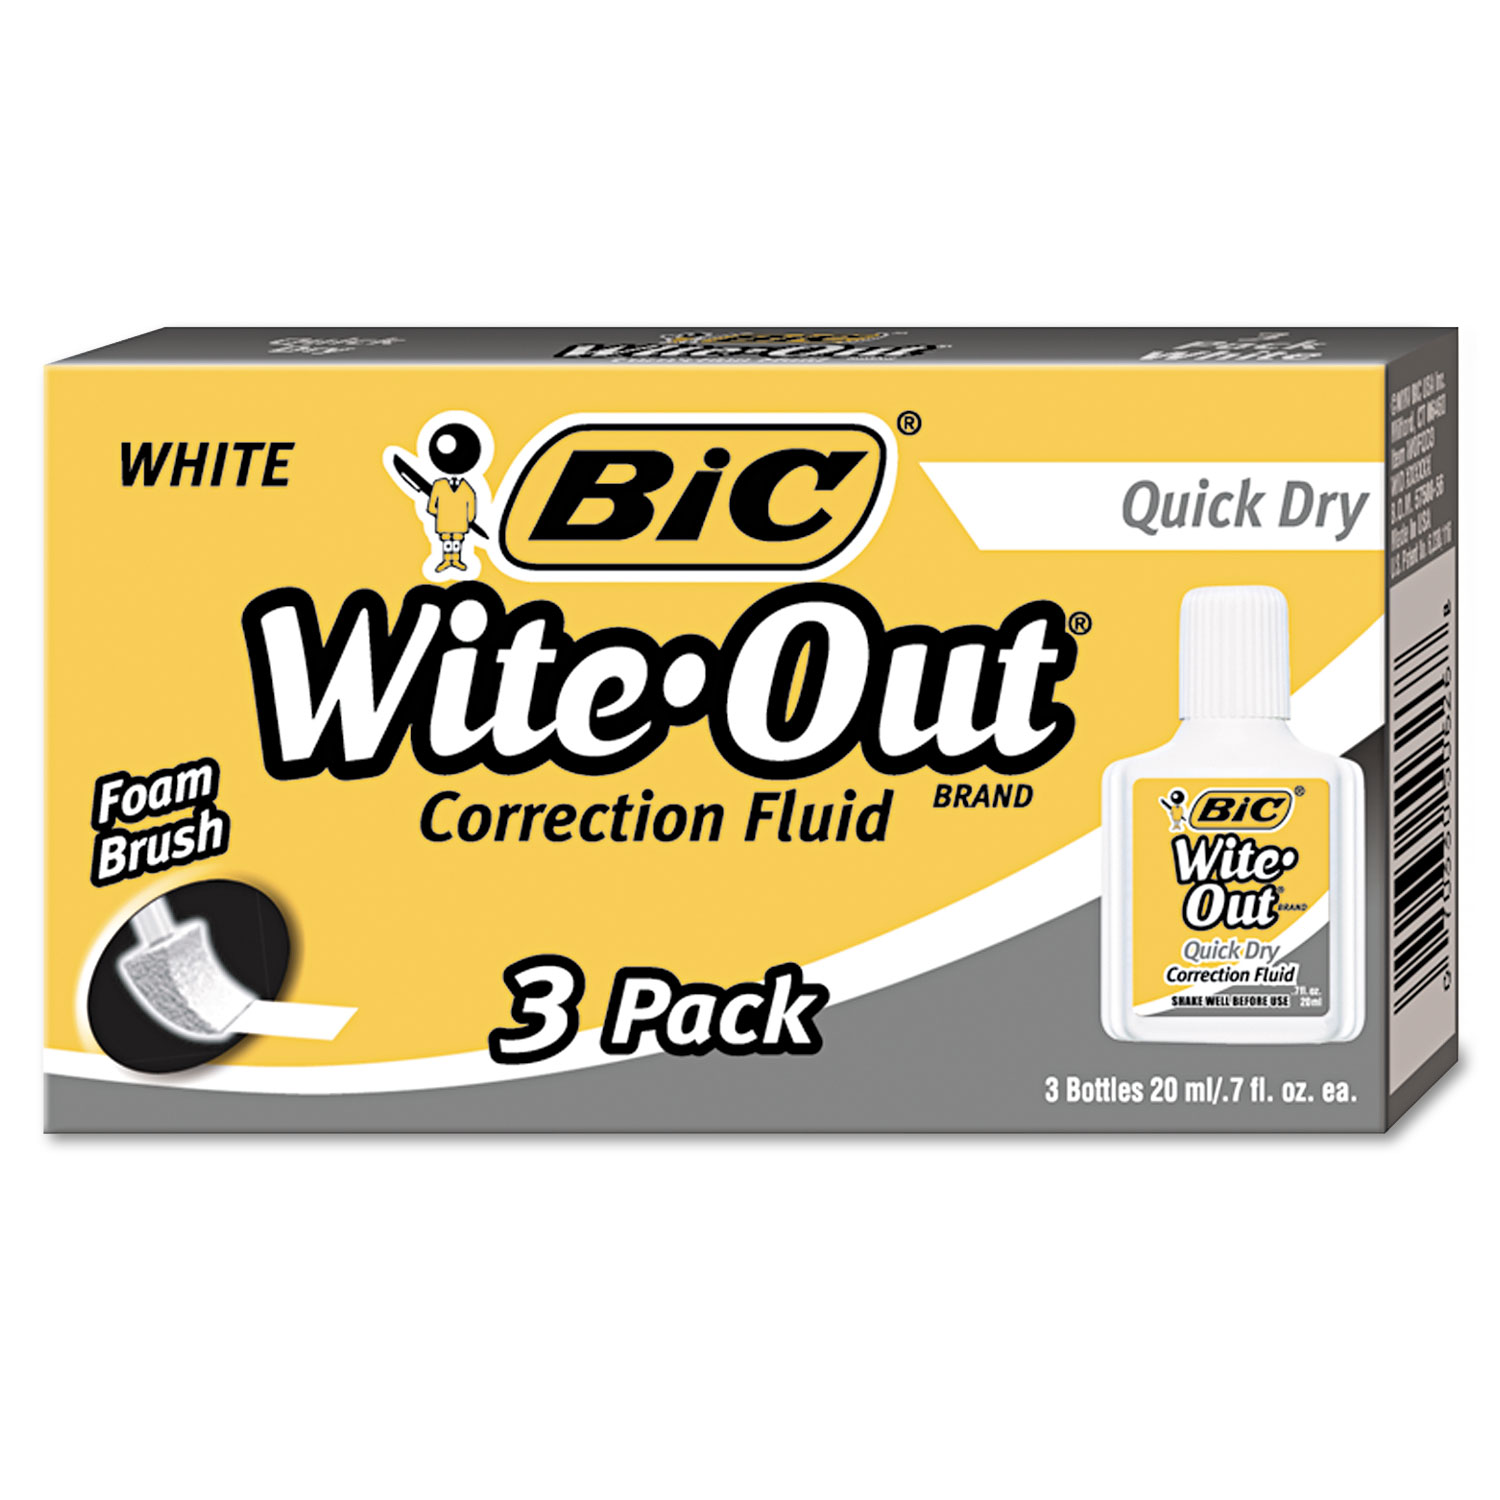  BIC WOFQD324 Wite-Out Quick Dry Correction Fluid, 20 mL Bottle, White, 3/Pack (BICWOFQD324) 